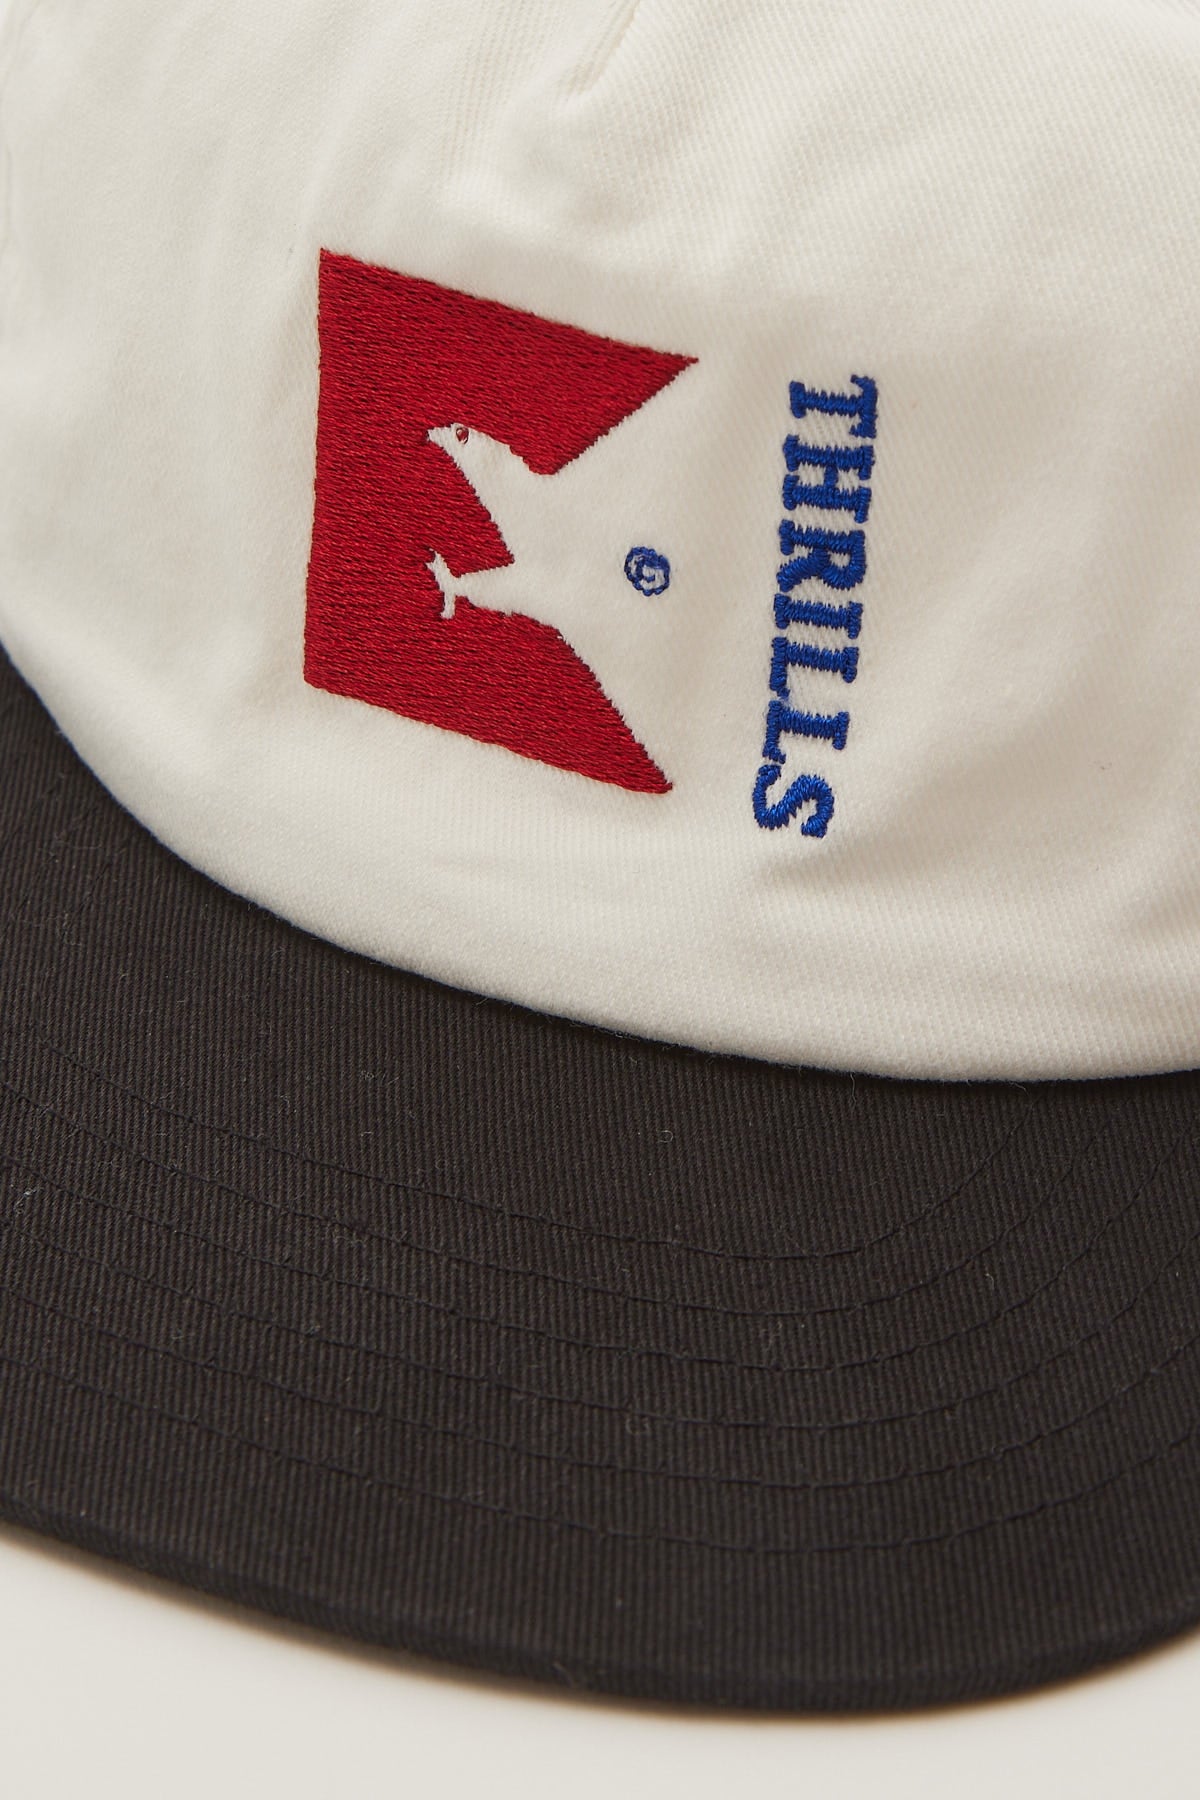 Thrills United For All 5 Panel Cap Dirty White